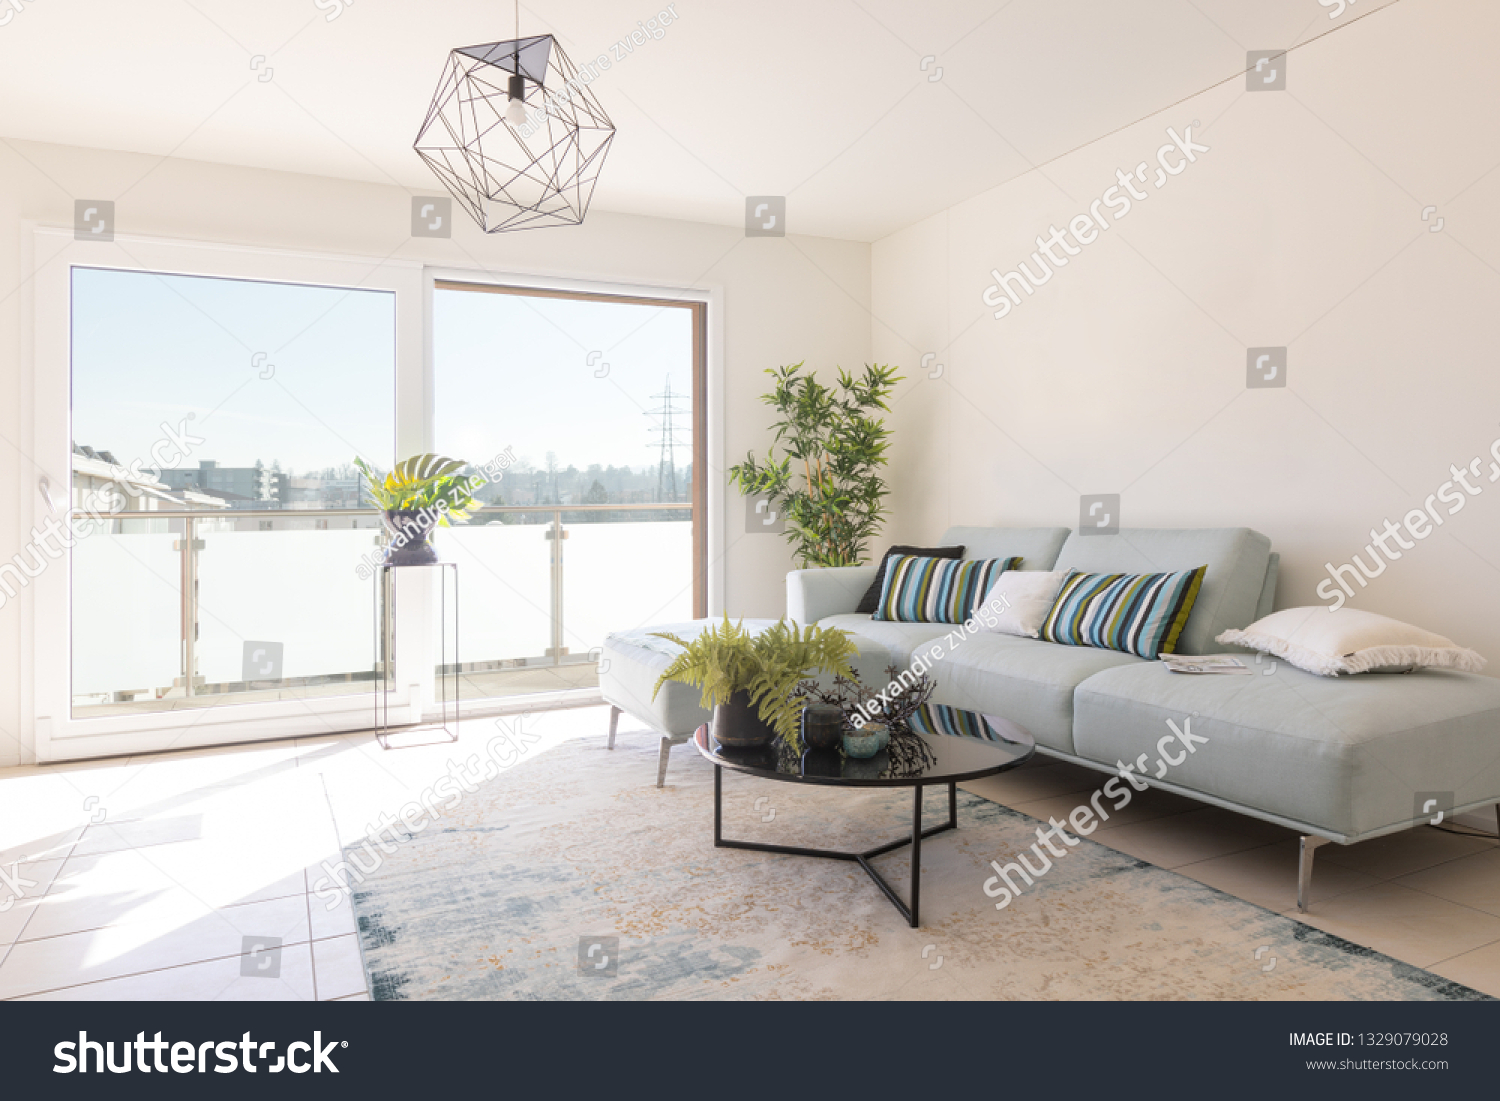 Modern living room with designer sofa and coffee table. Window with view. Nobody inside #1329079028